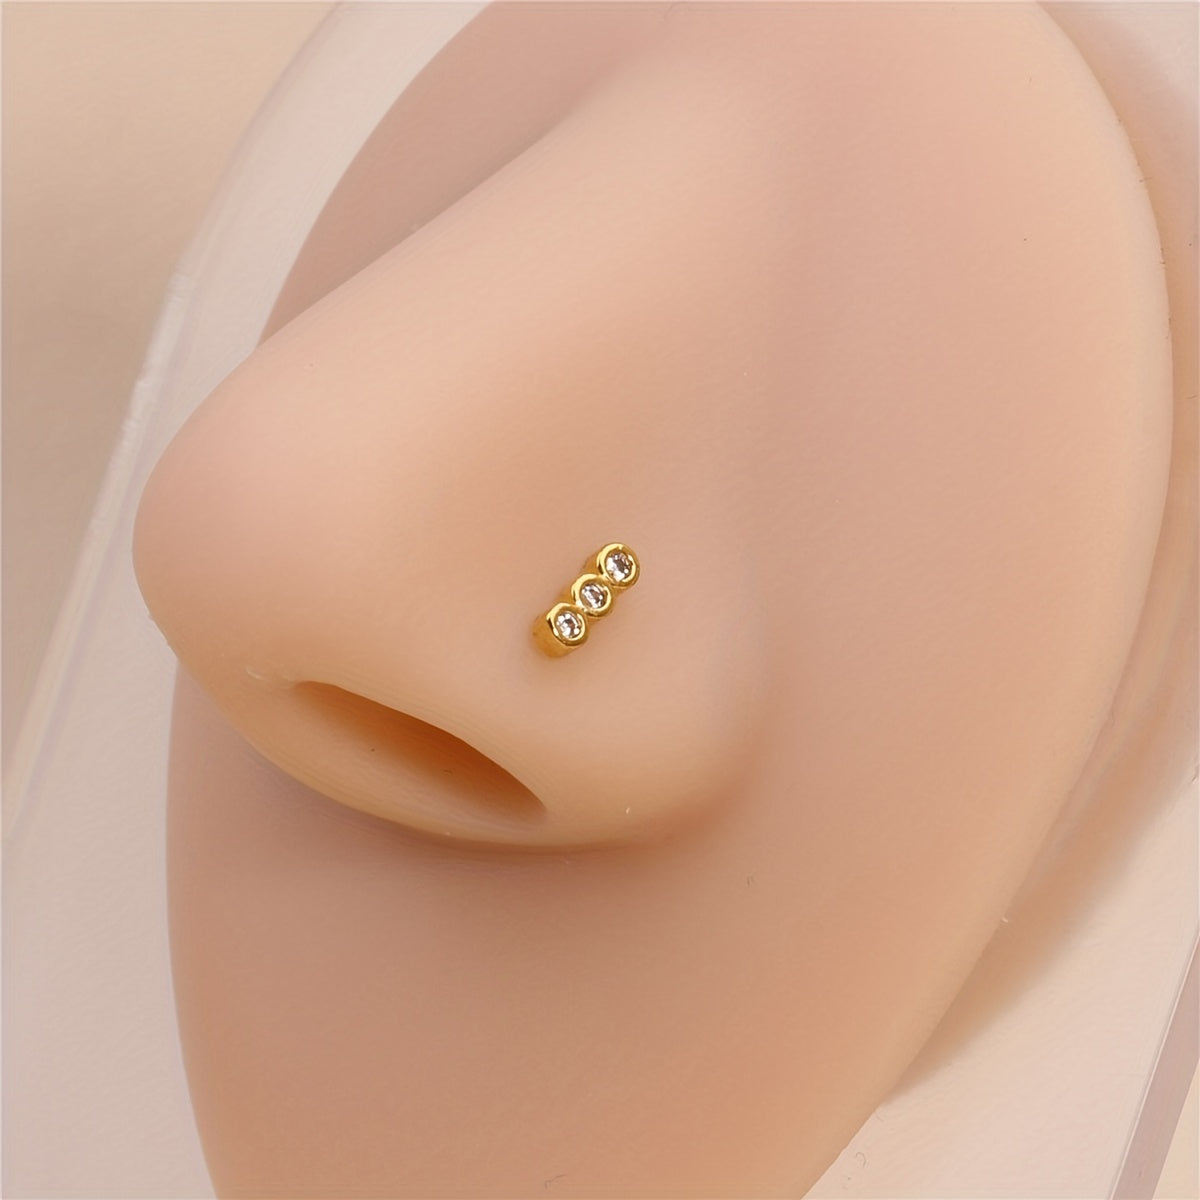 1Pcs Golden L Shape Nose Ring Stud For Women Men CZ Body Piercing Jewelry Holiday Gifts